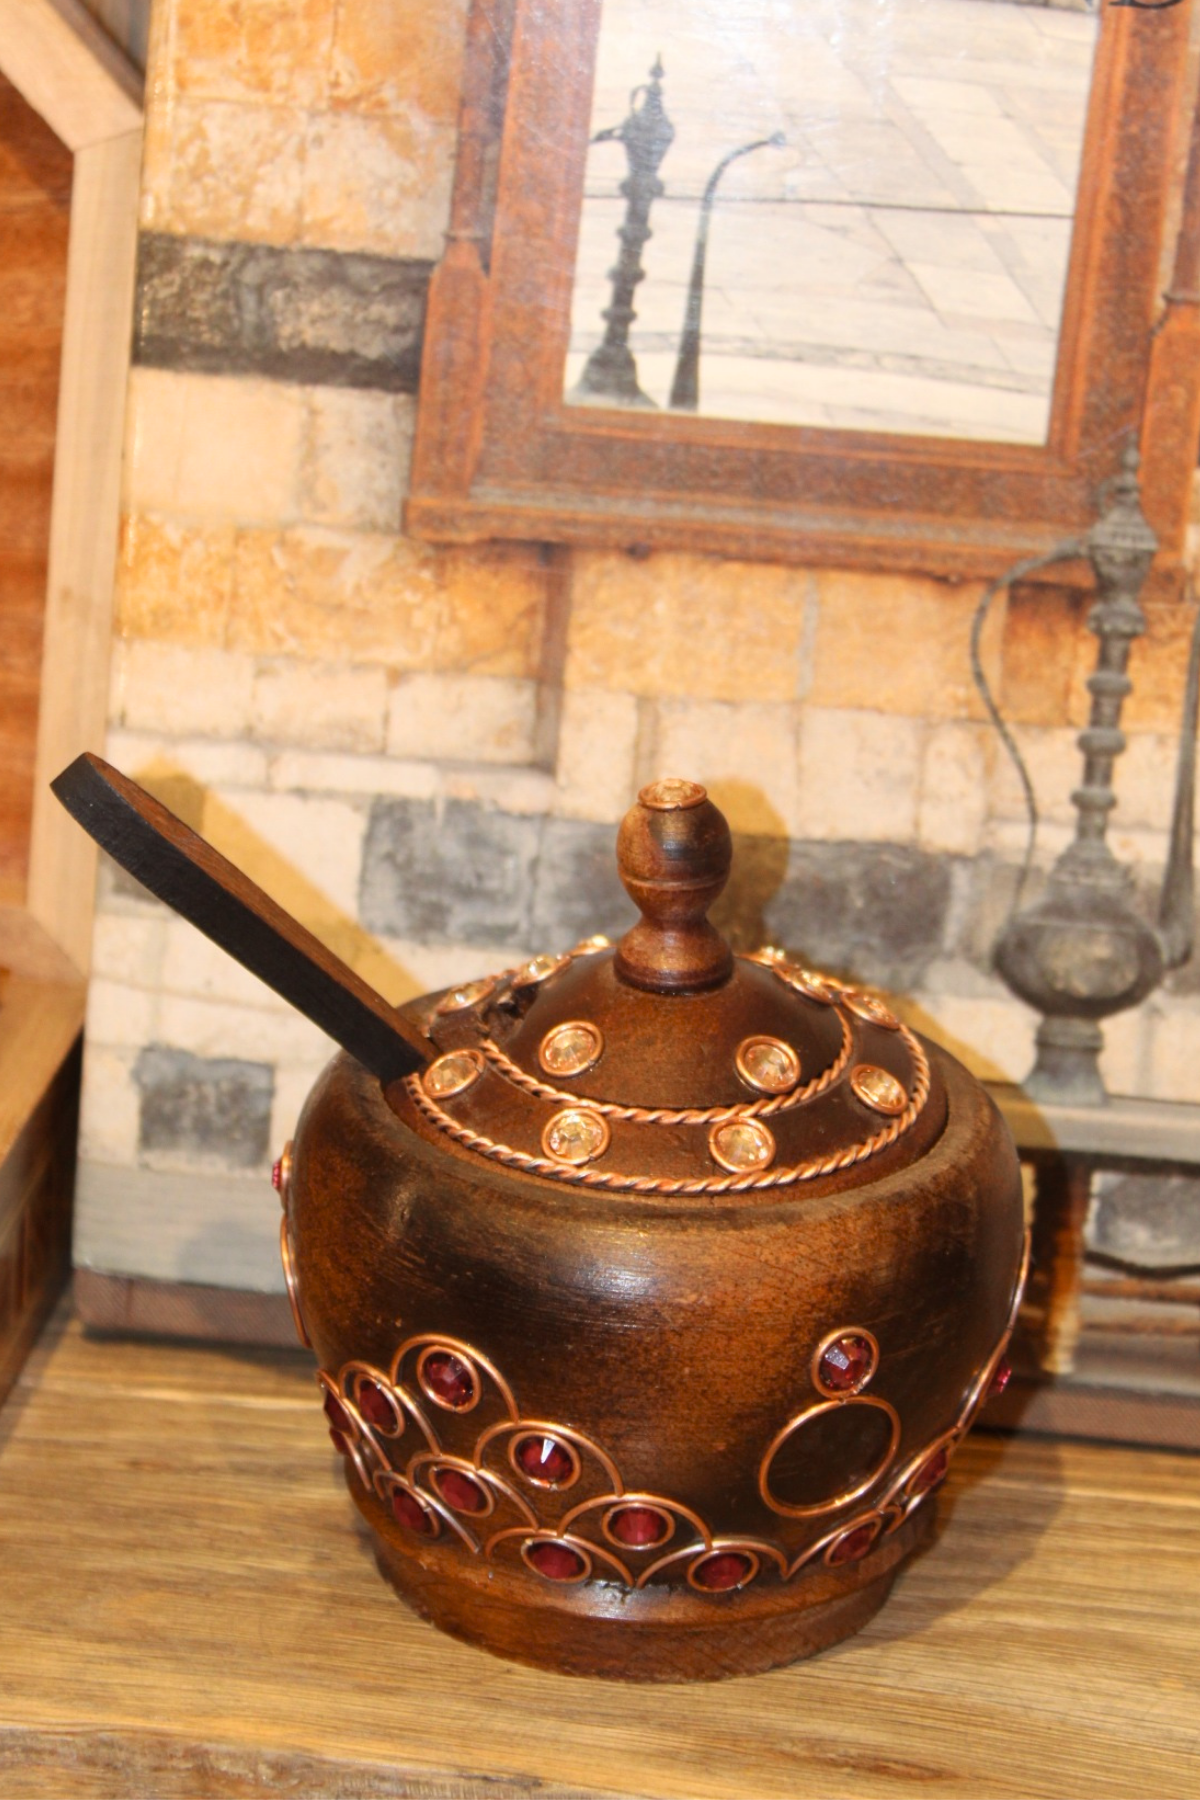 Sugar Bowl With a Wooden Spoon